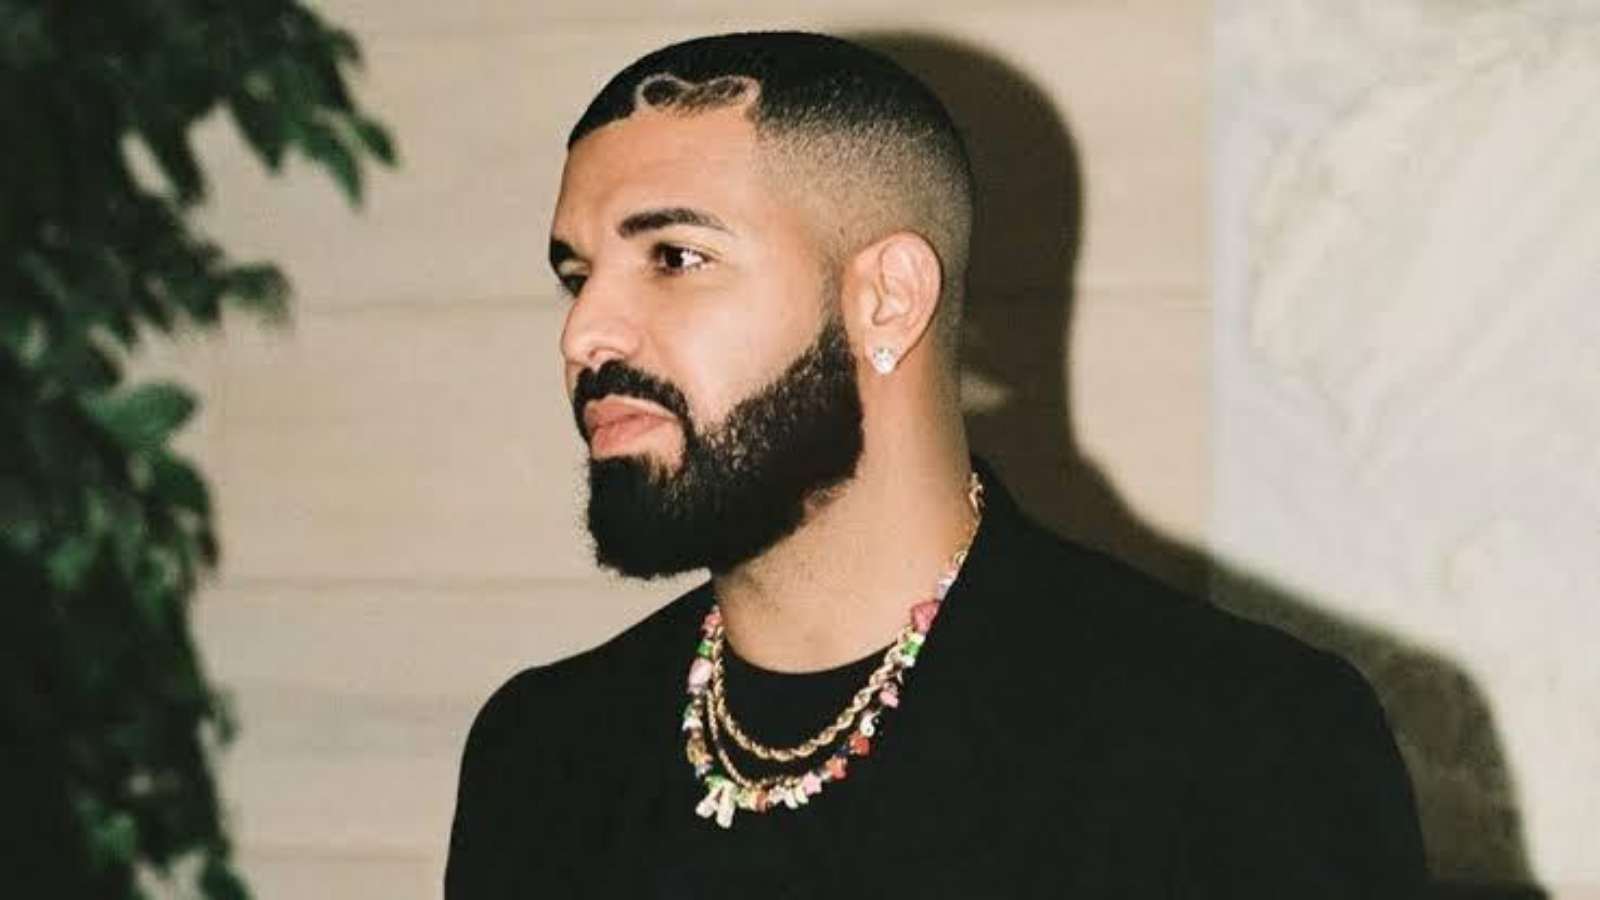 Twitter reacts to Drake's new face tattoo